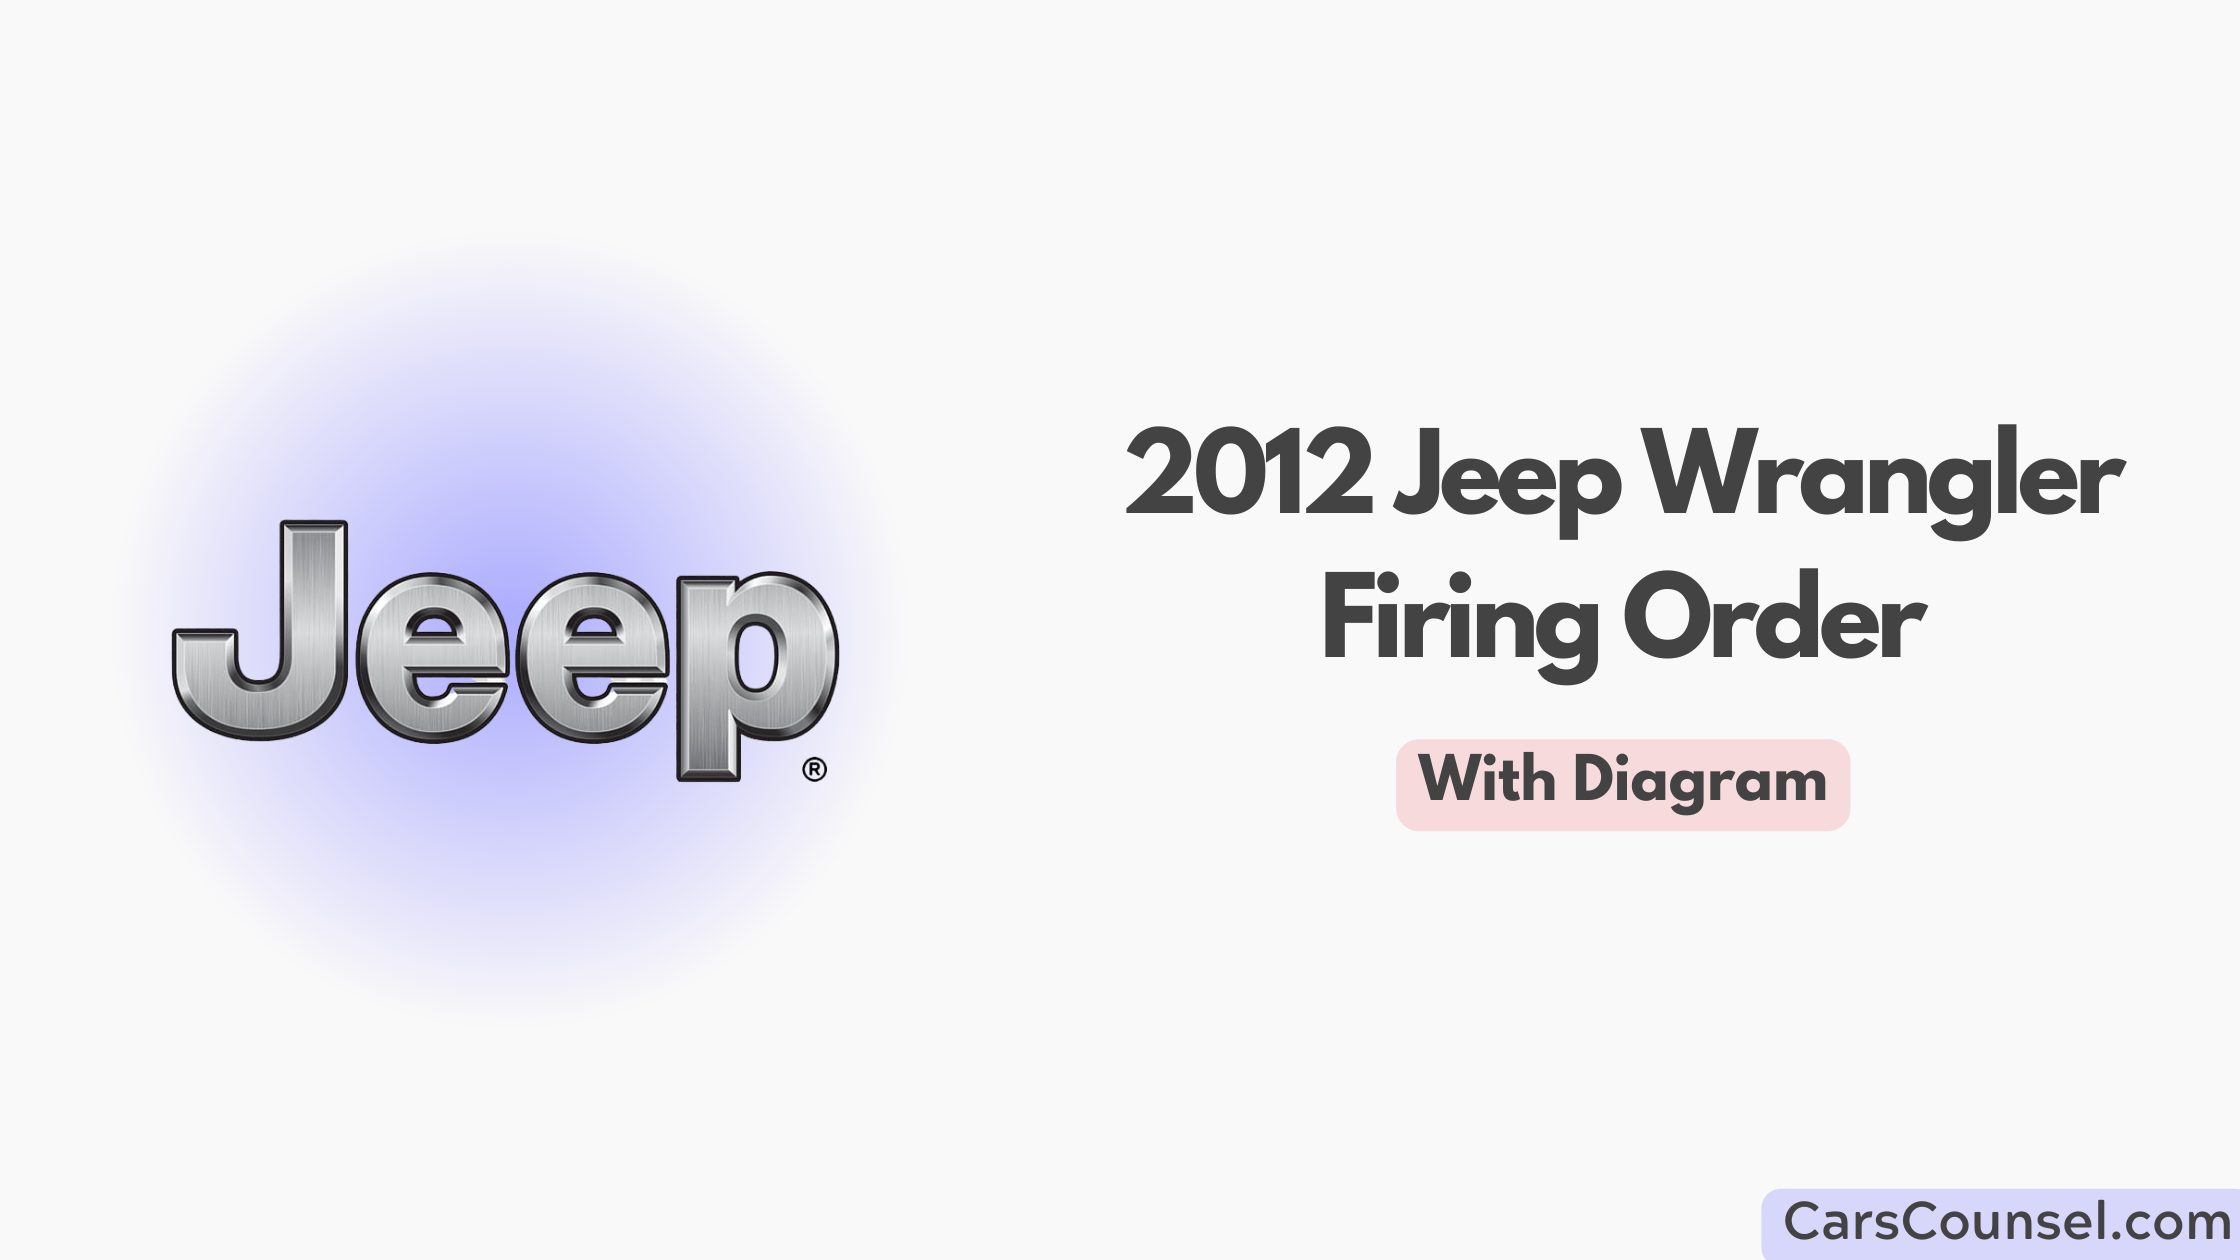 2012 Jeep Wrangler Firing Order With Diagram